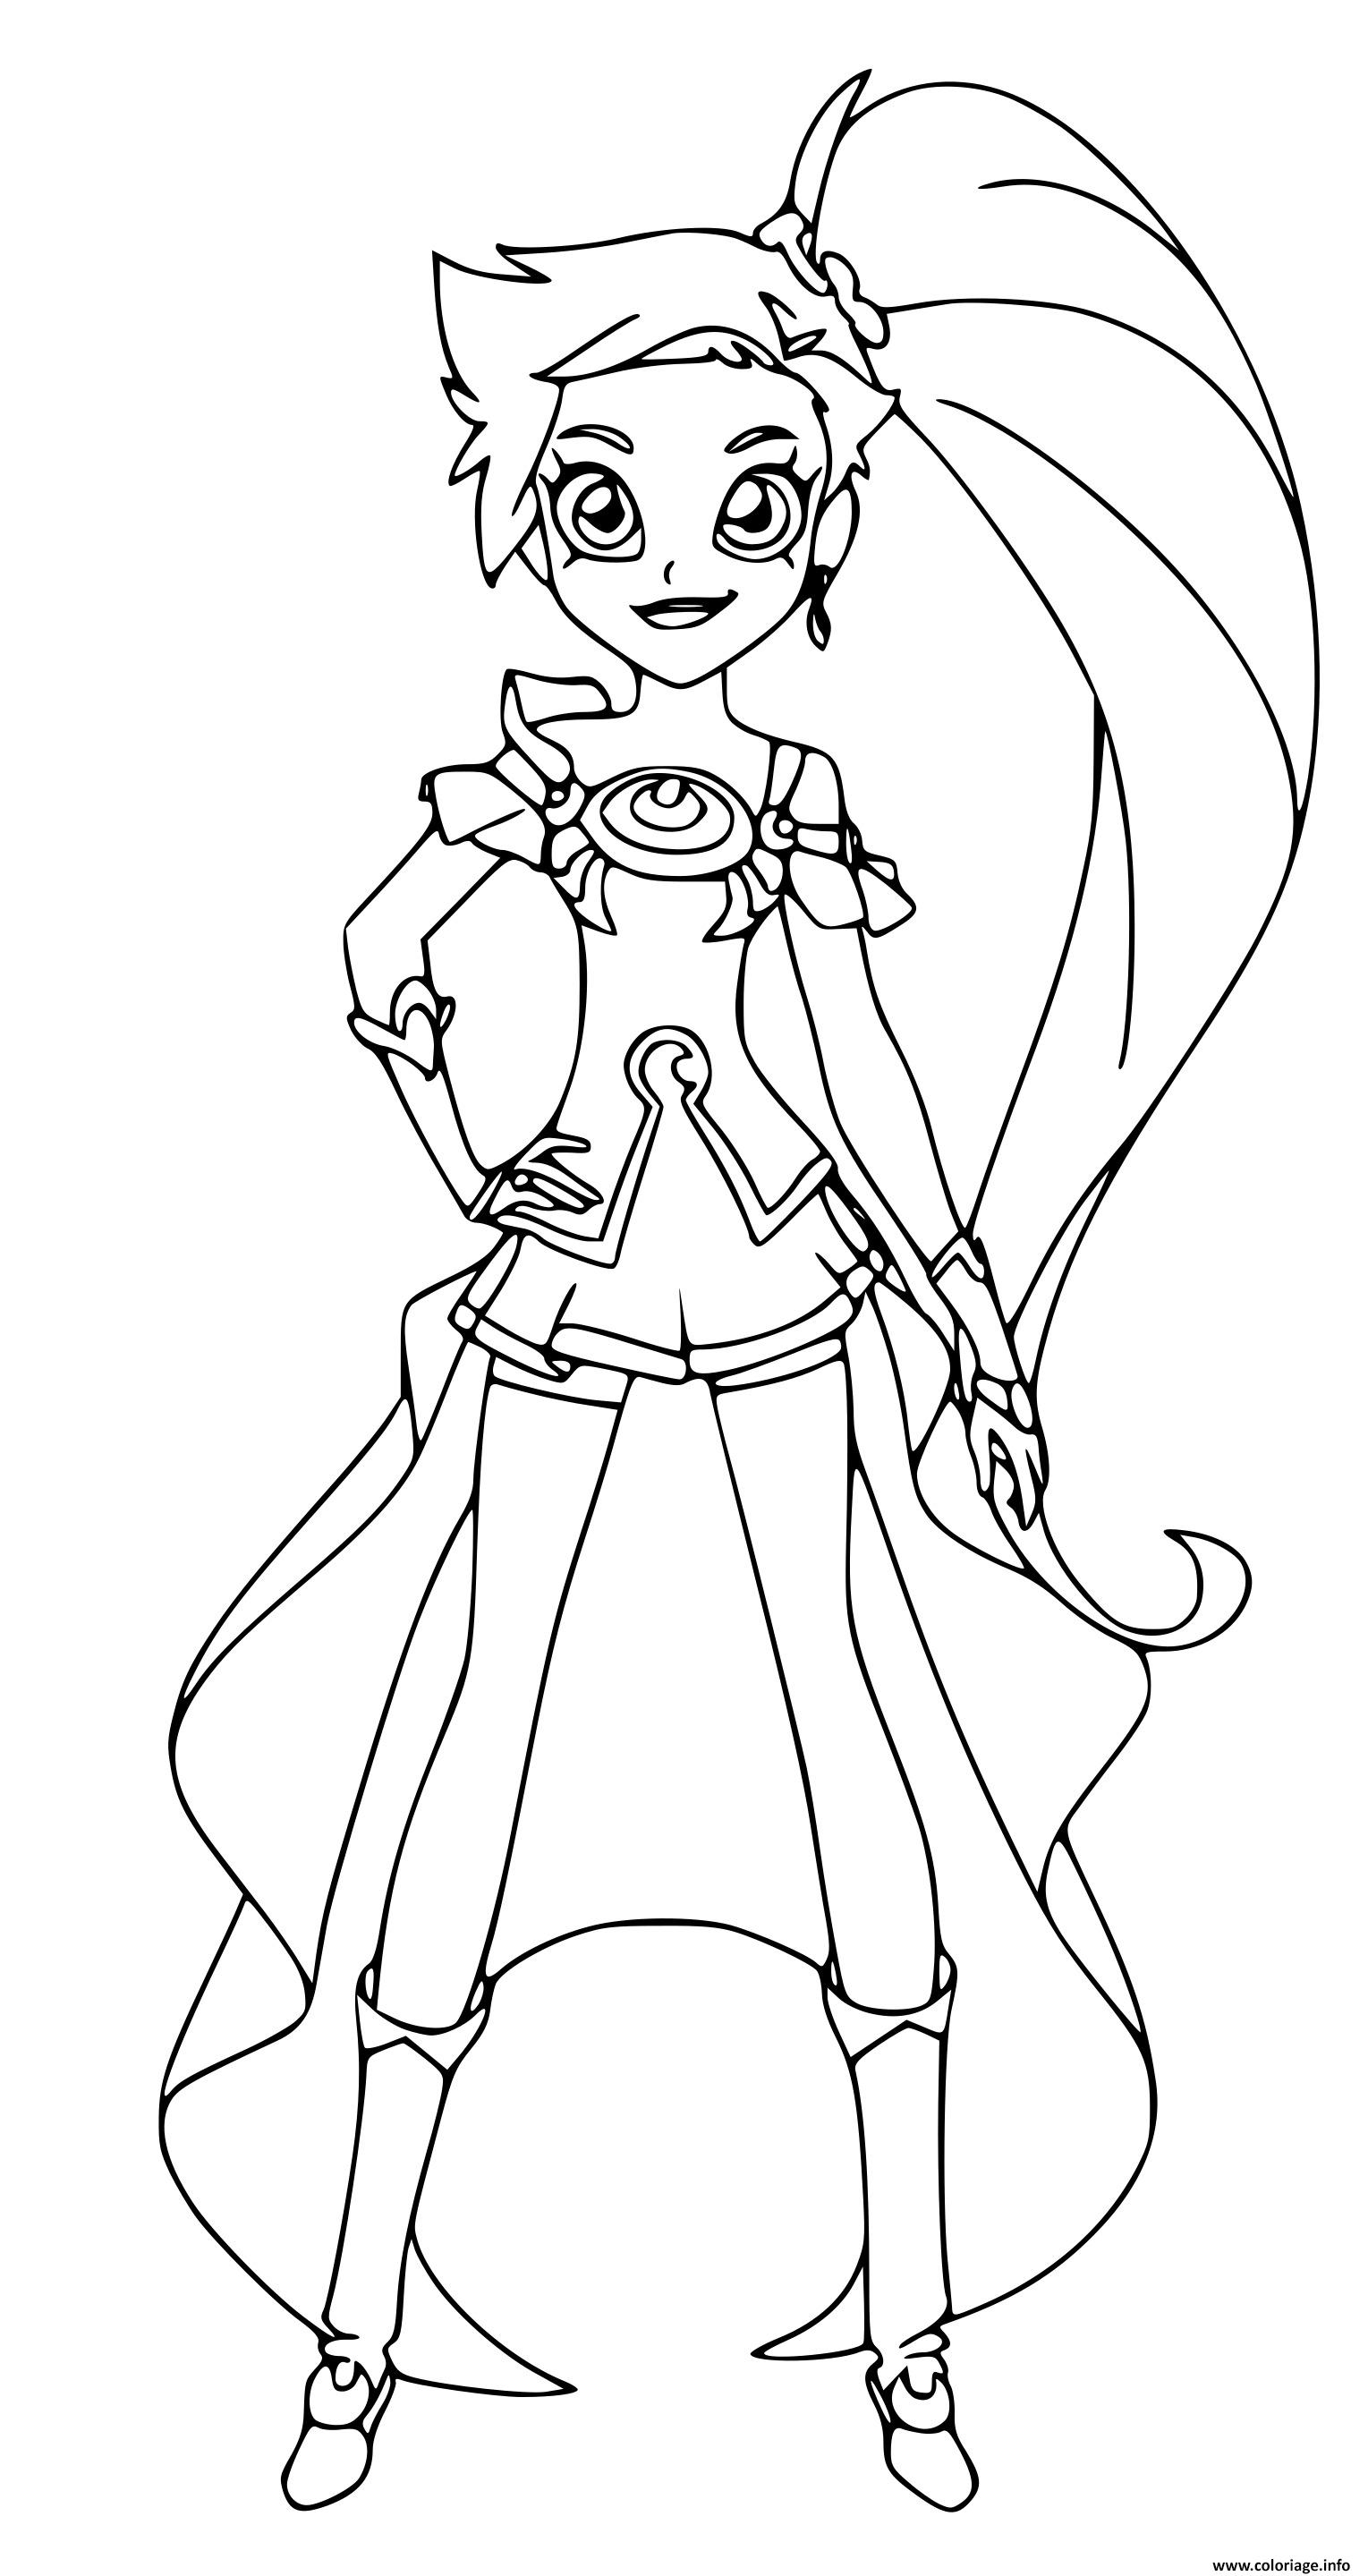 Collection Of Lolirock Coloring Pages Free Printable